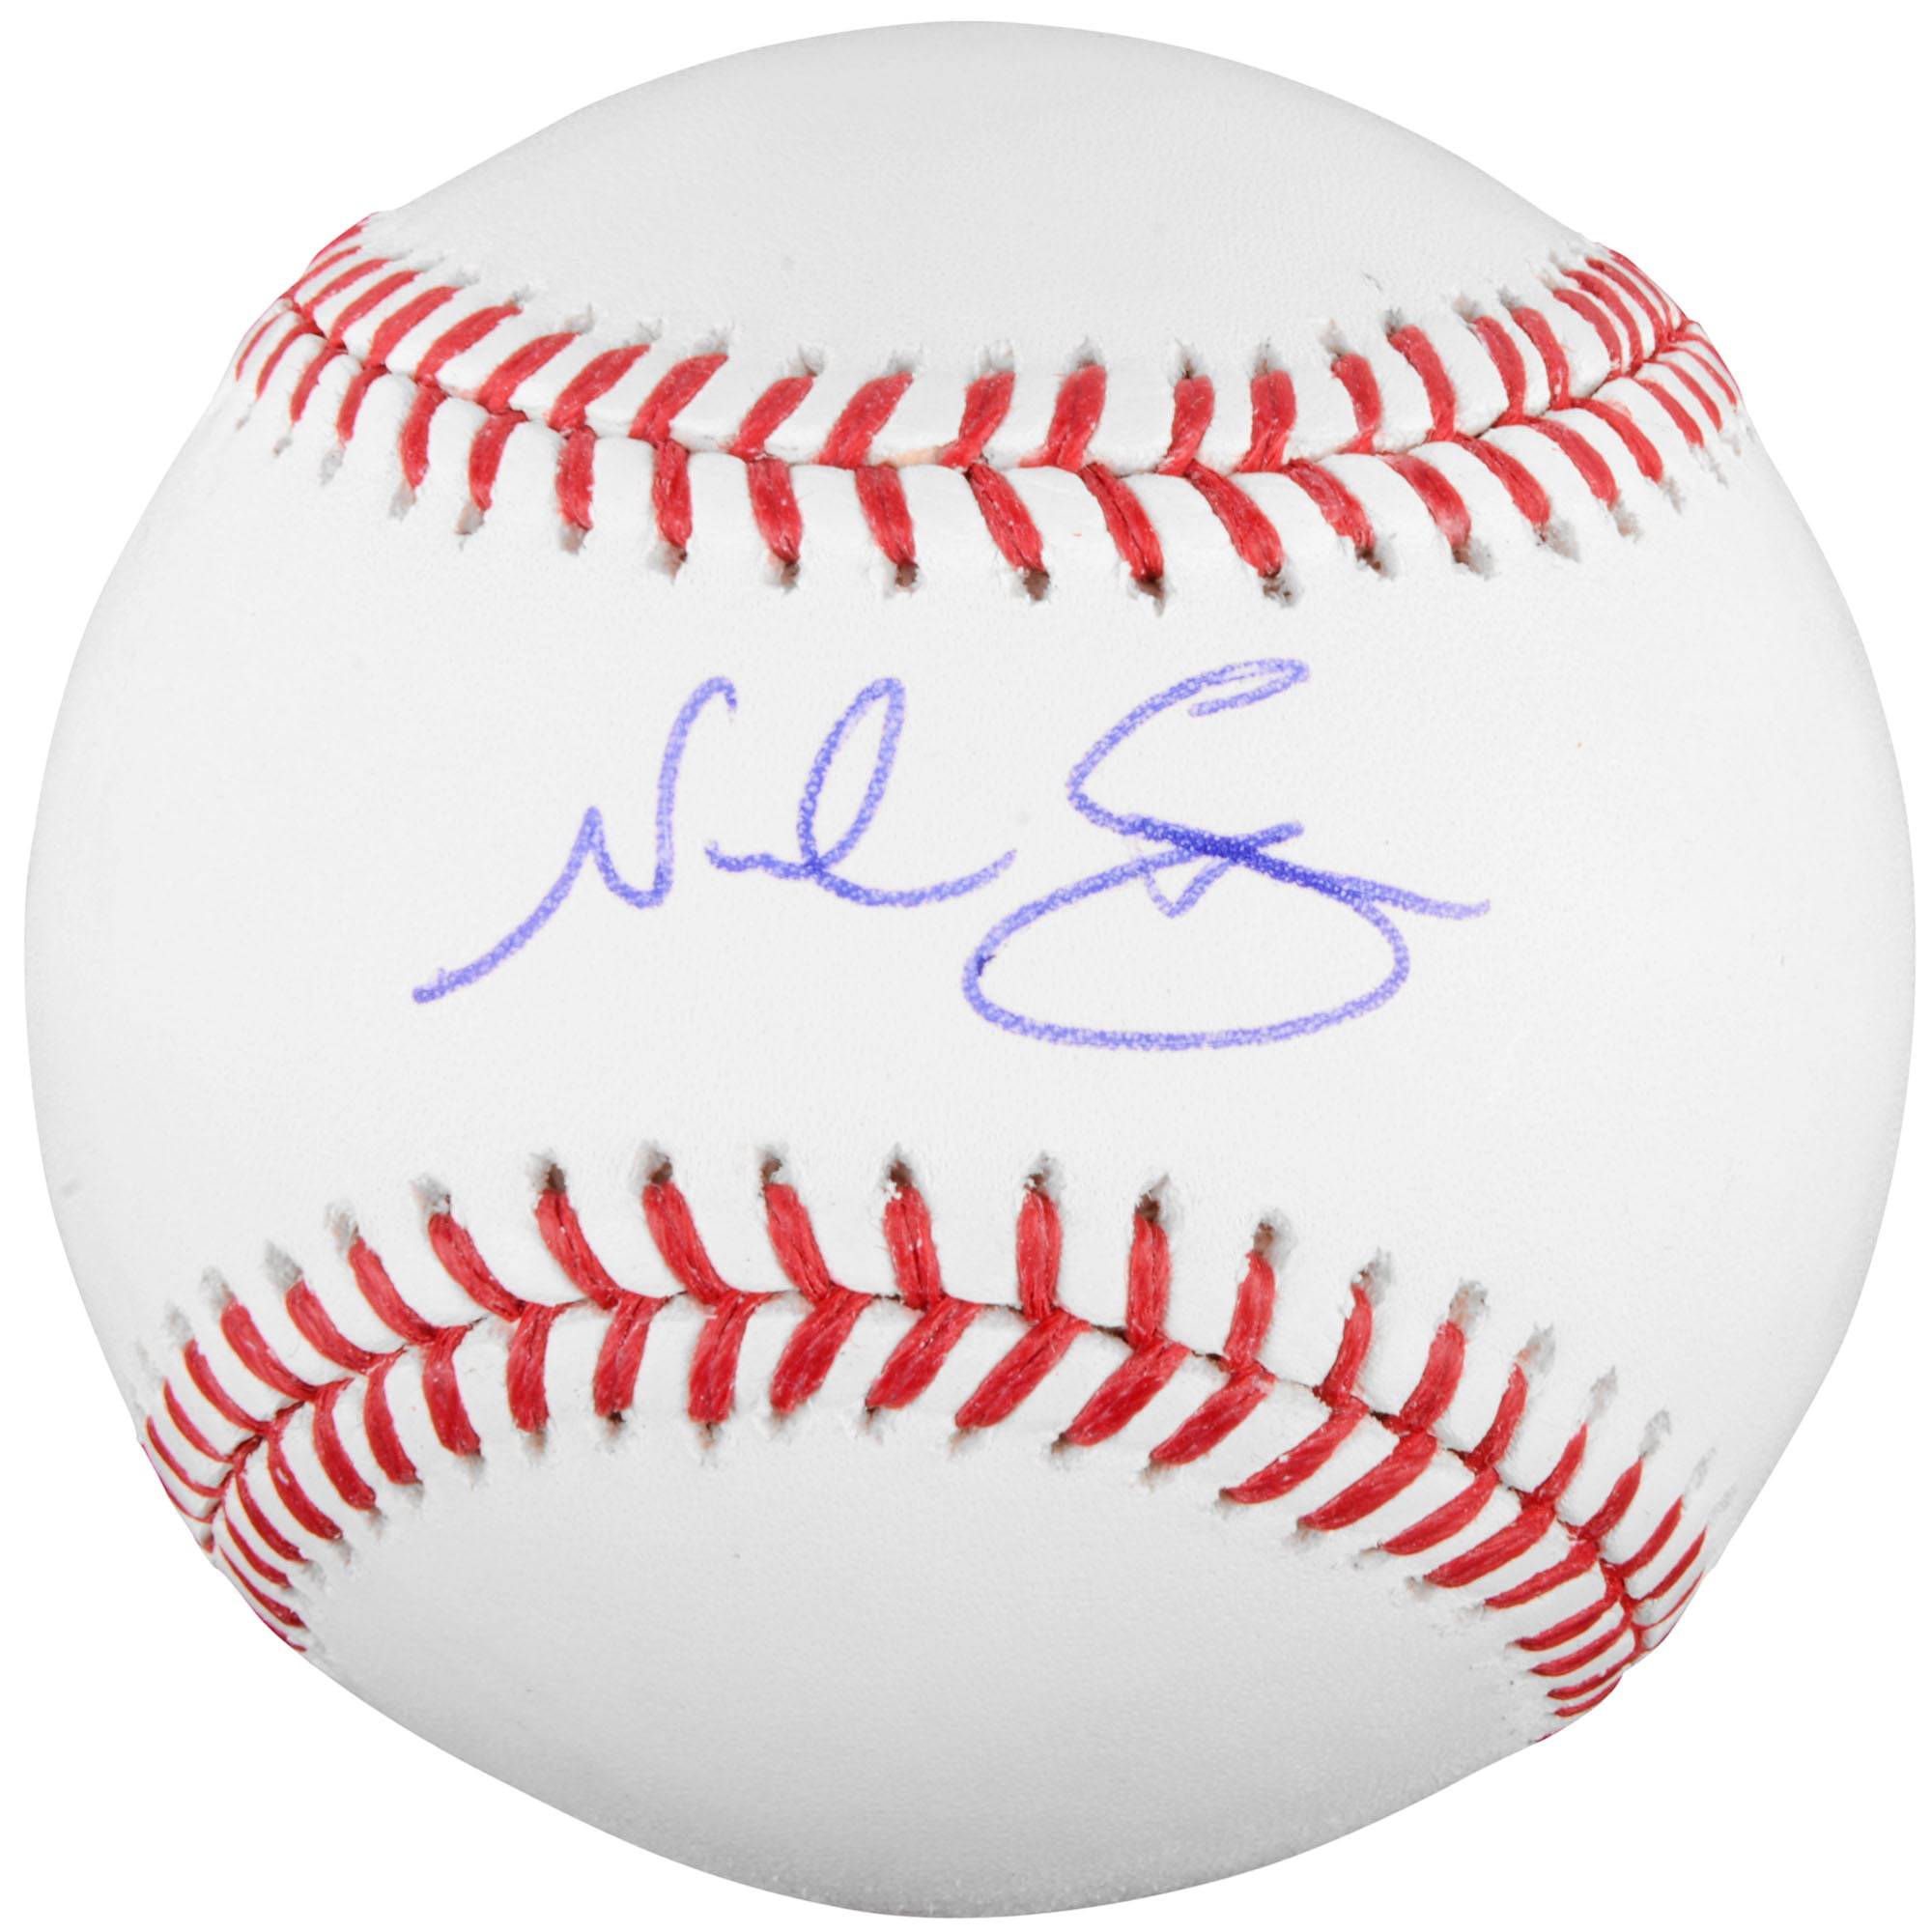 Todd Frazier New York Mets Autographed Baseball Fanatics Authentic Certified Autographed Baseballs